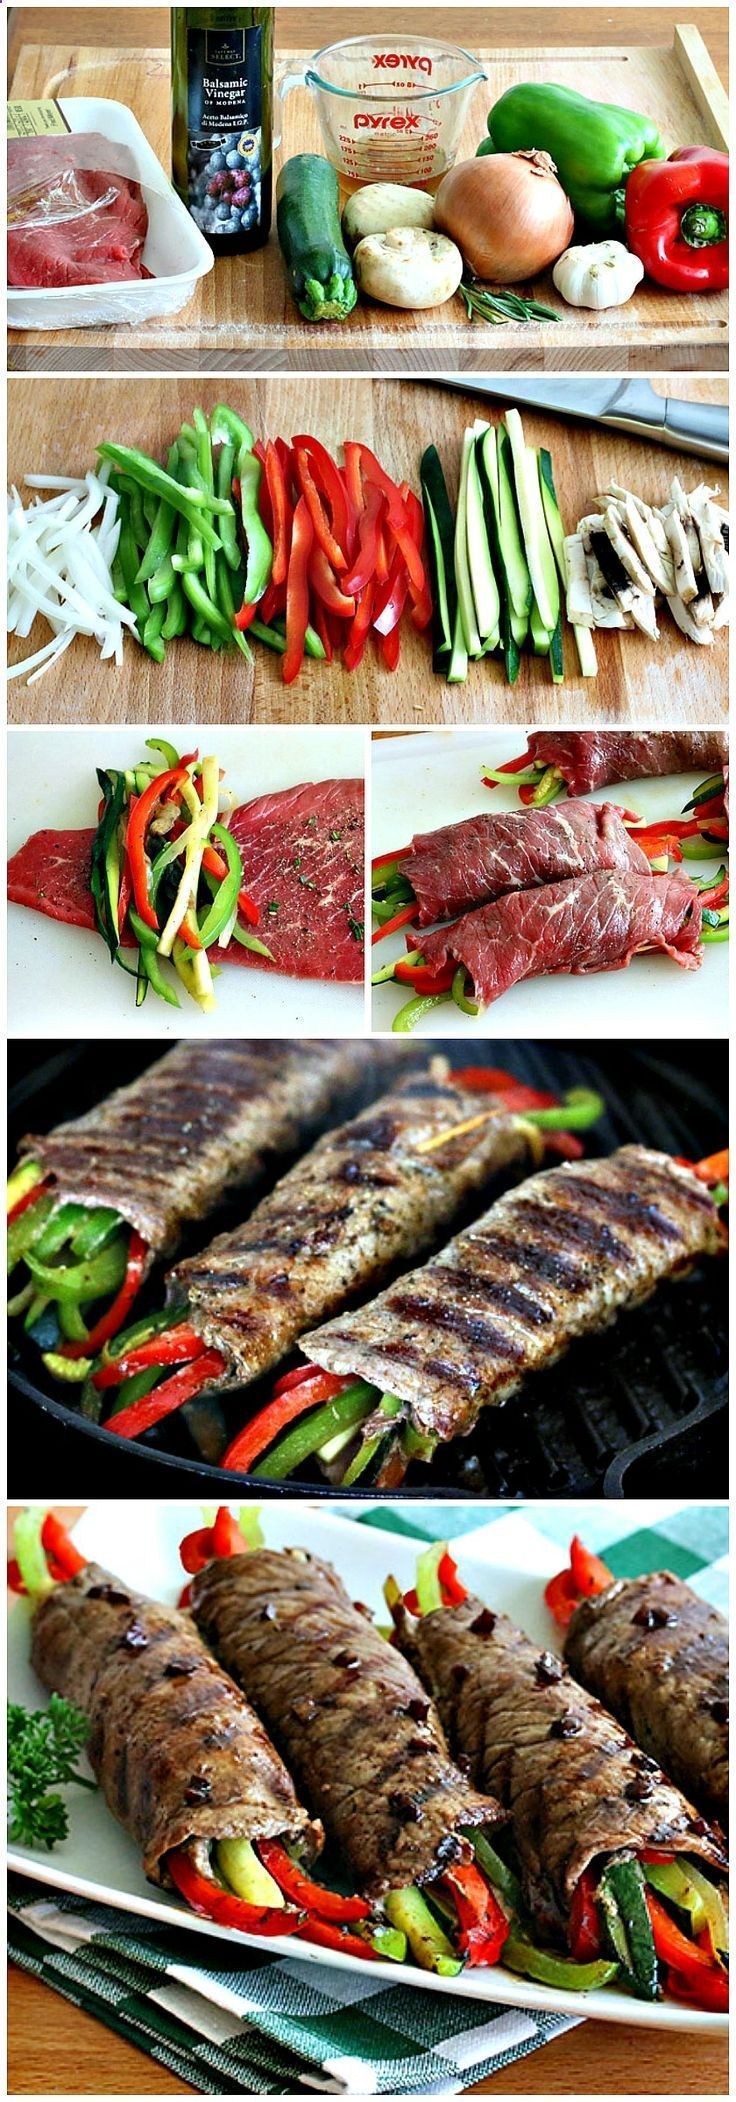 Steak Filled With Veggies | Use Organic Veggies | East Recipe | Healthy Recipe | Clean Eating Approved